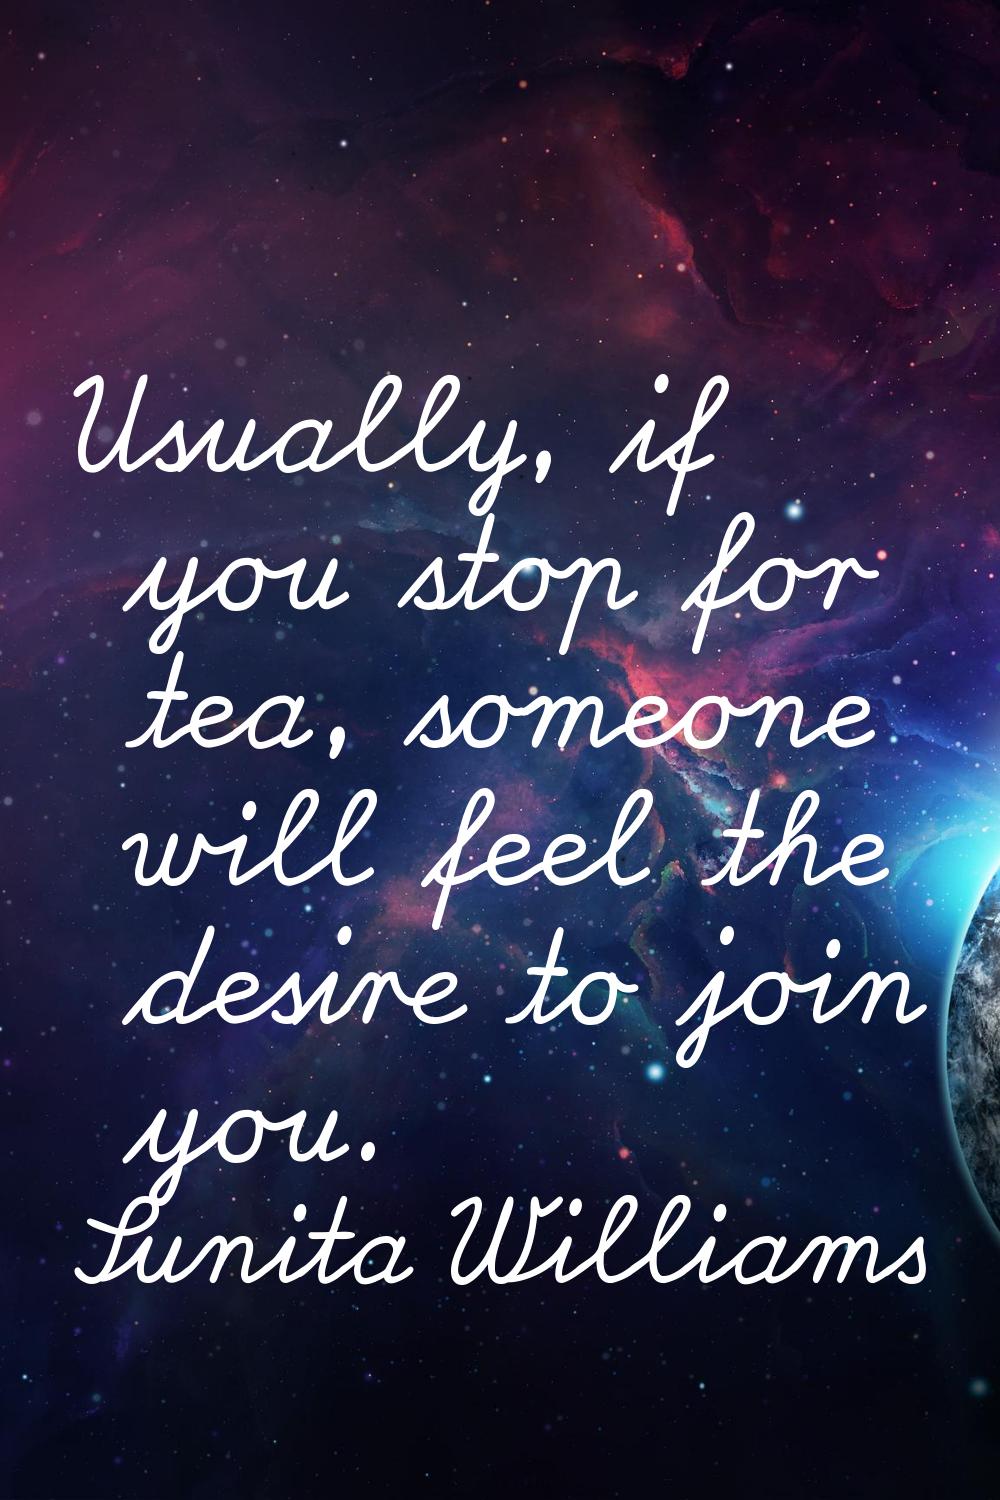 Usually, if you stop for tea, someone will feel the desire to join you.